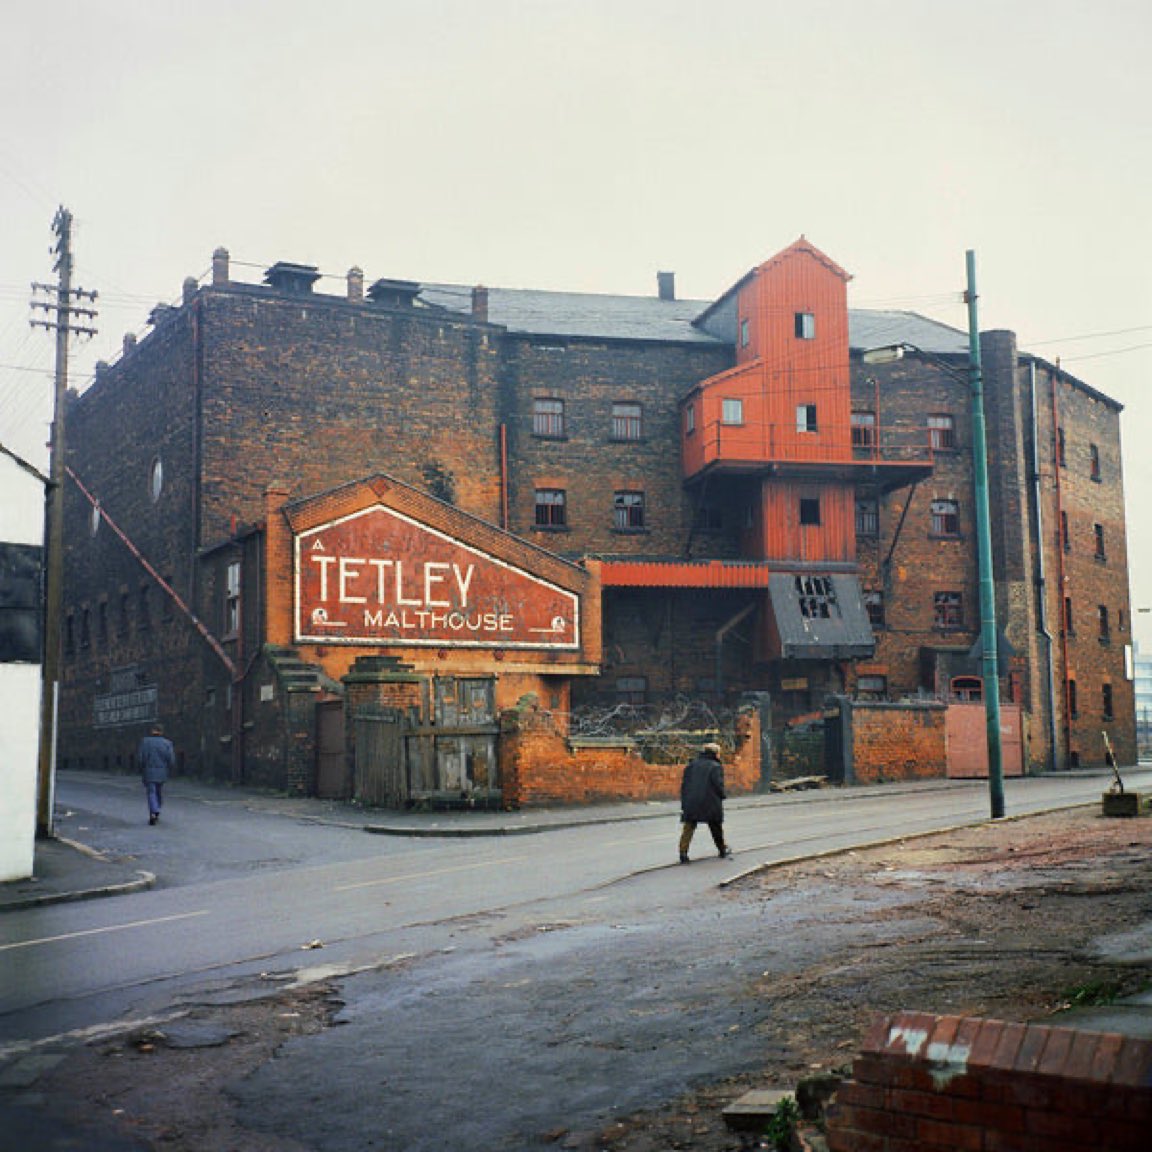 Morning all. Photograph by Peter Mitchell, Tetley Malthouse, Marsh Lane, Leeds, Winter, 1973.